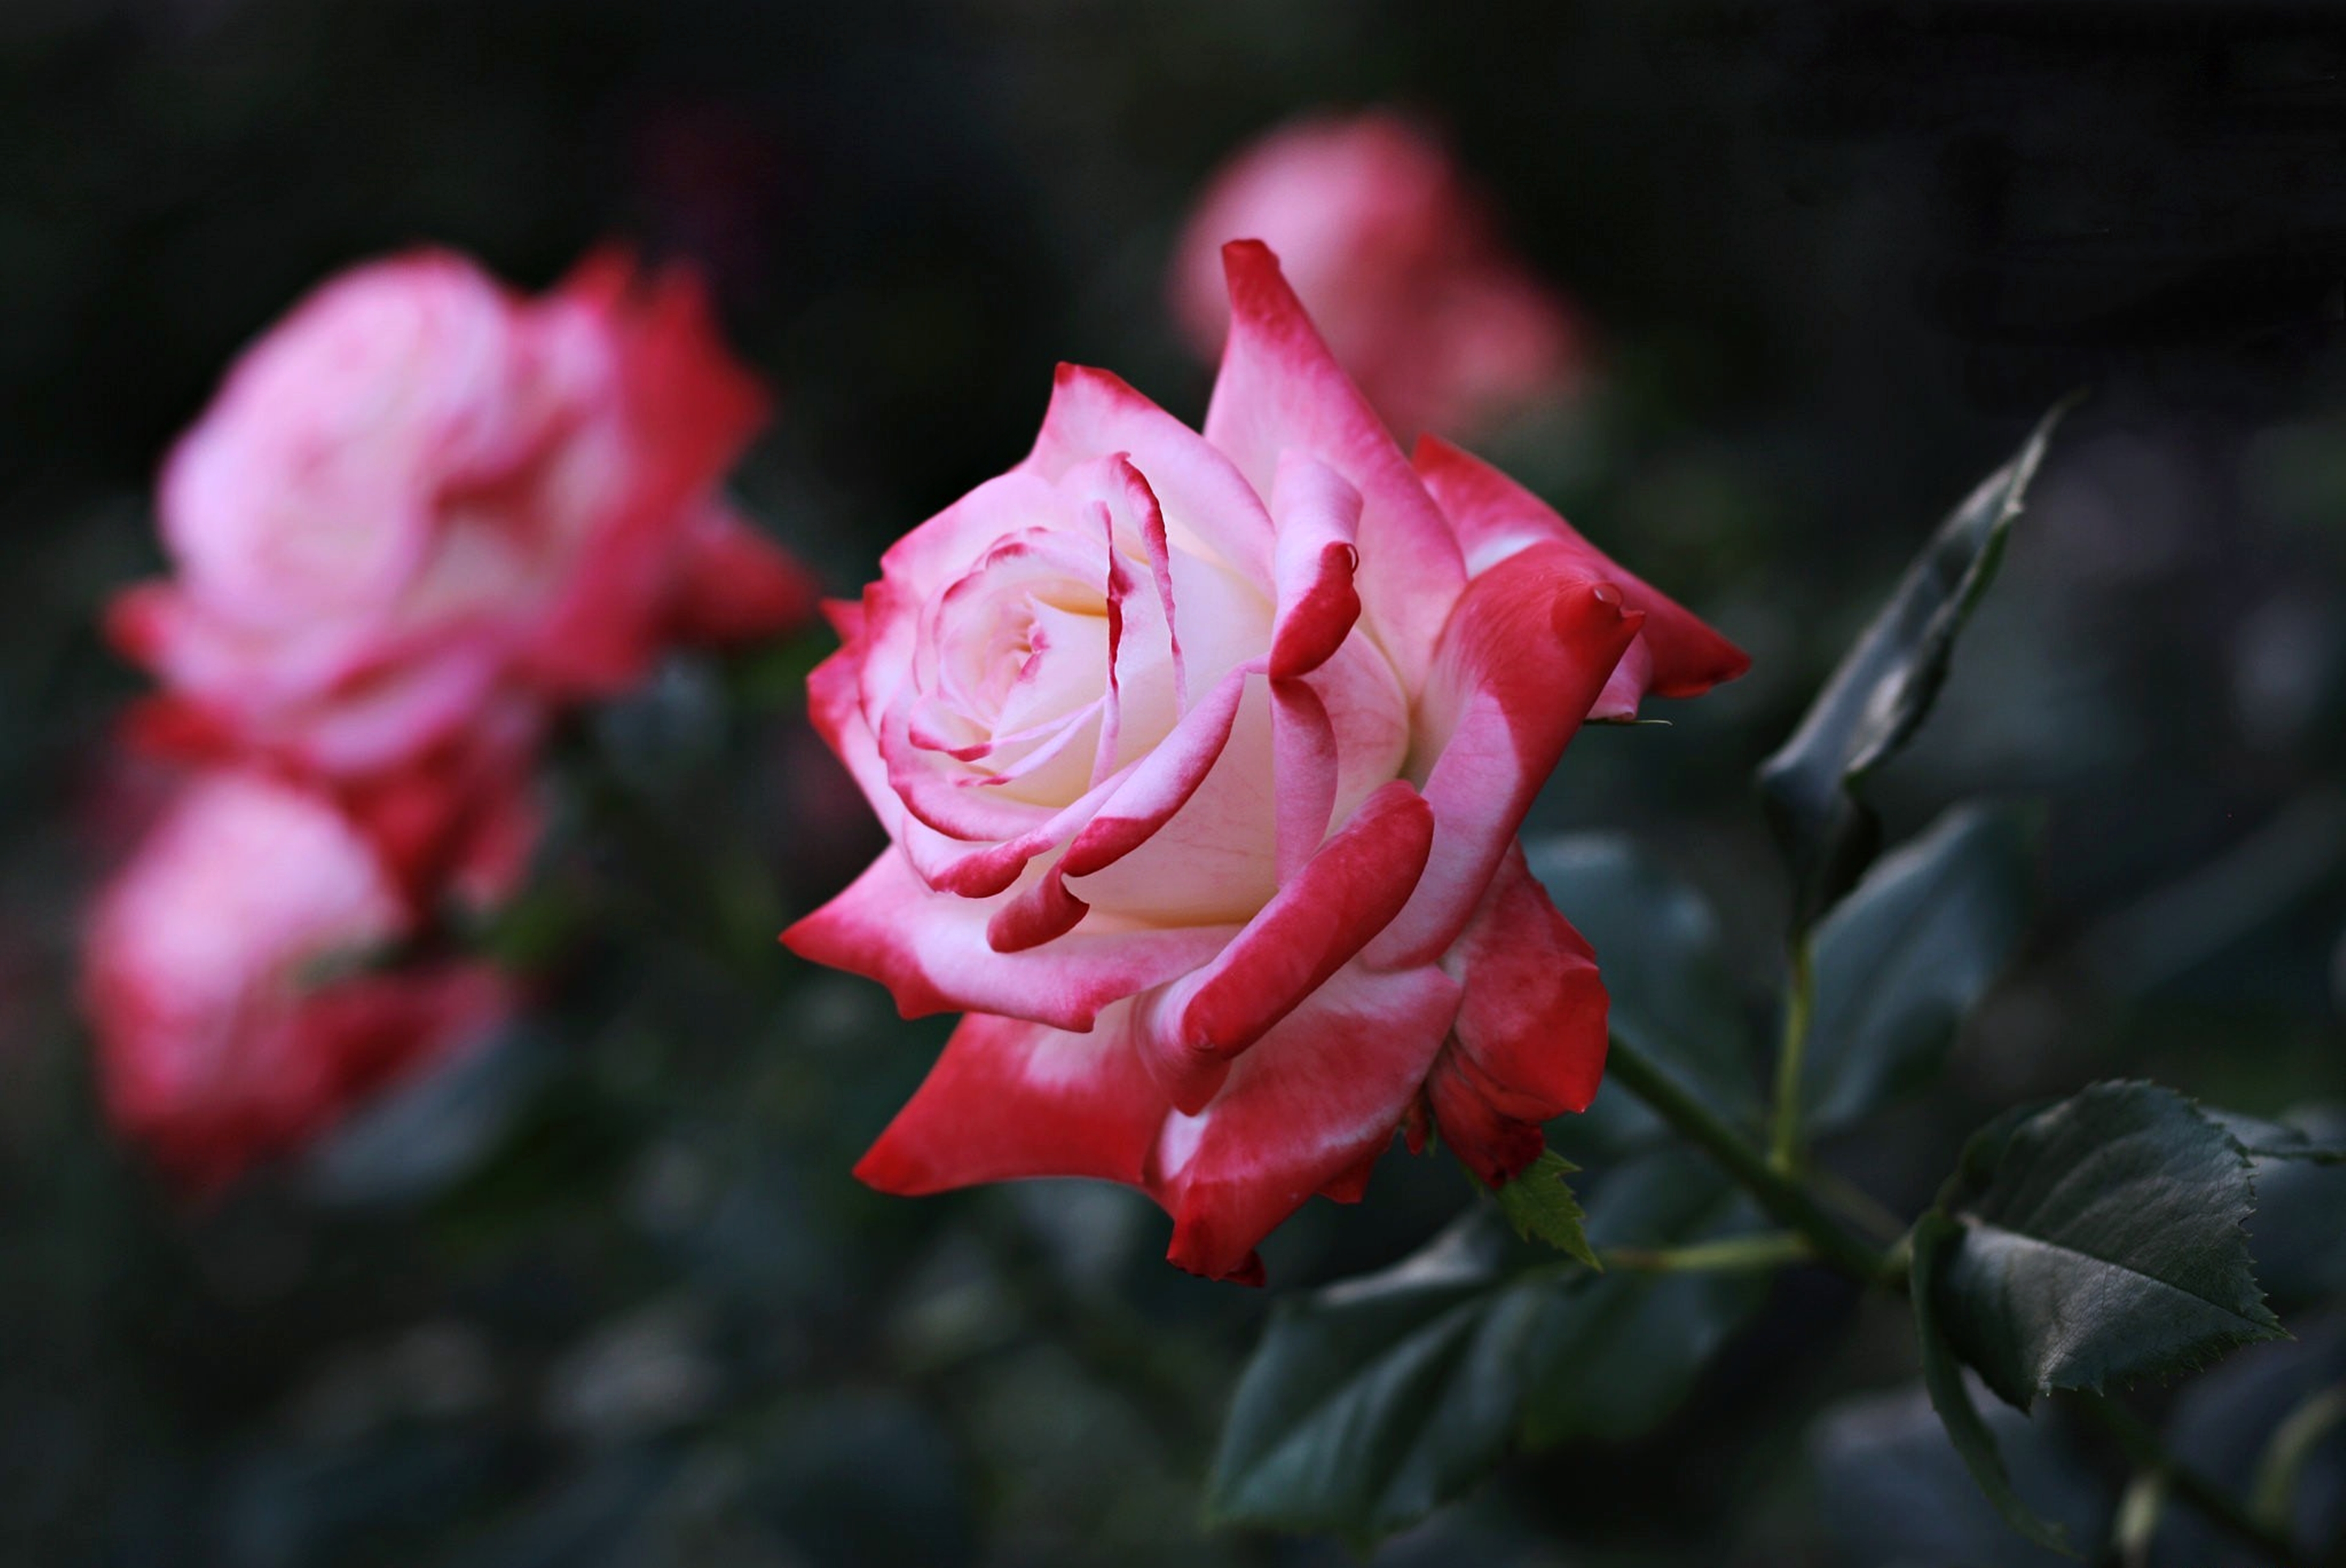 rose 4k Ultra HD Wallpaper and Background Image | 3840x2567 | ID:568700